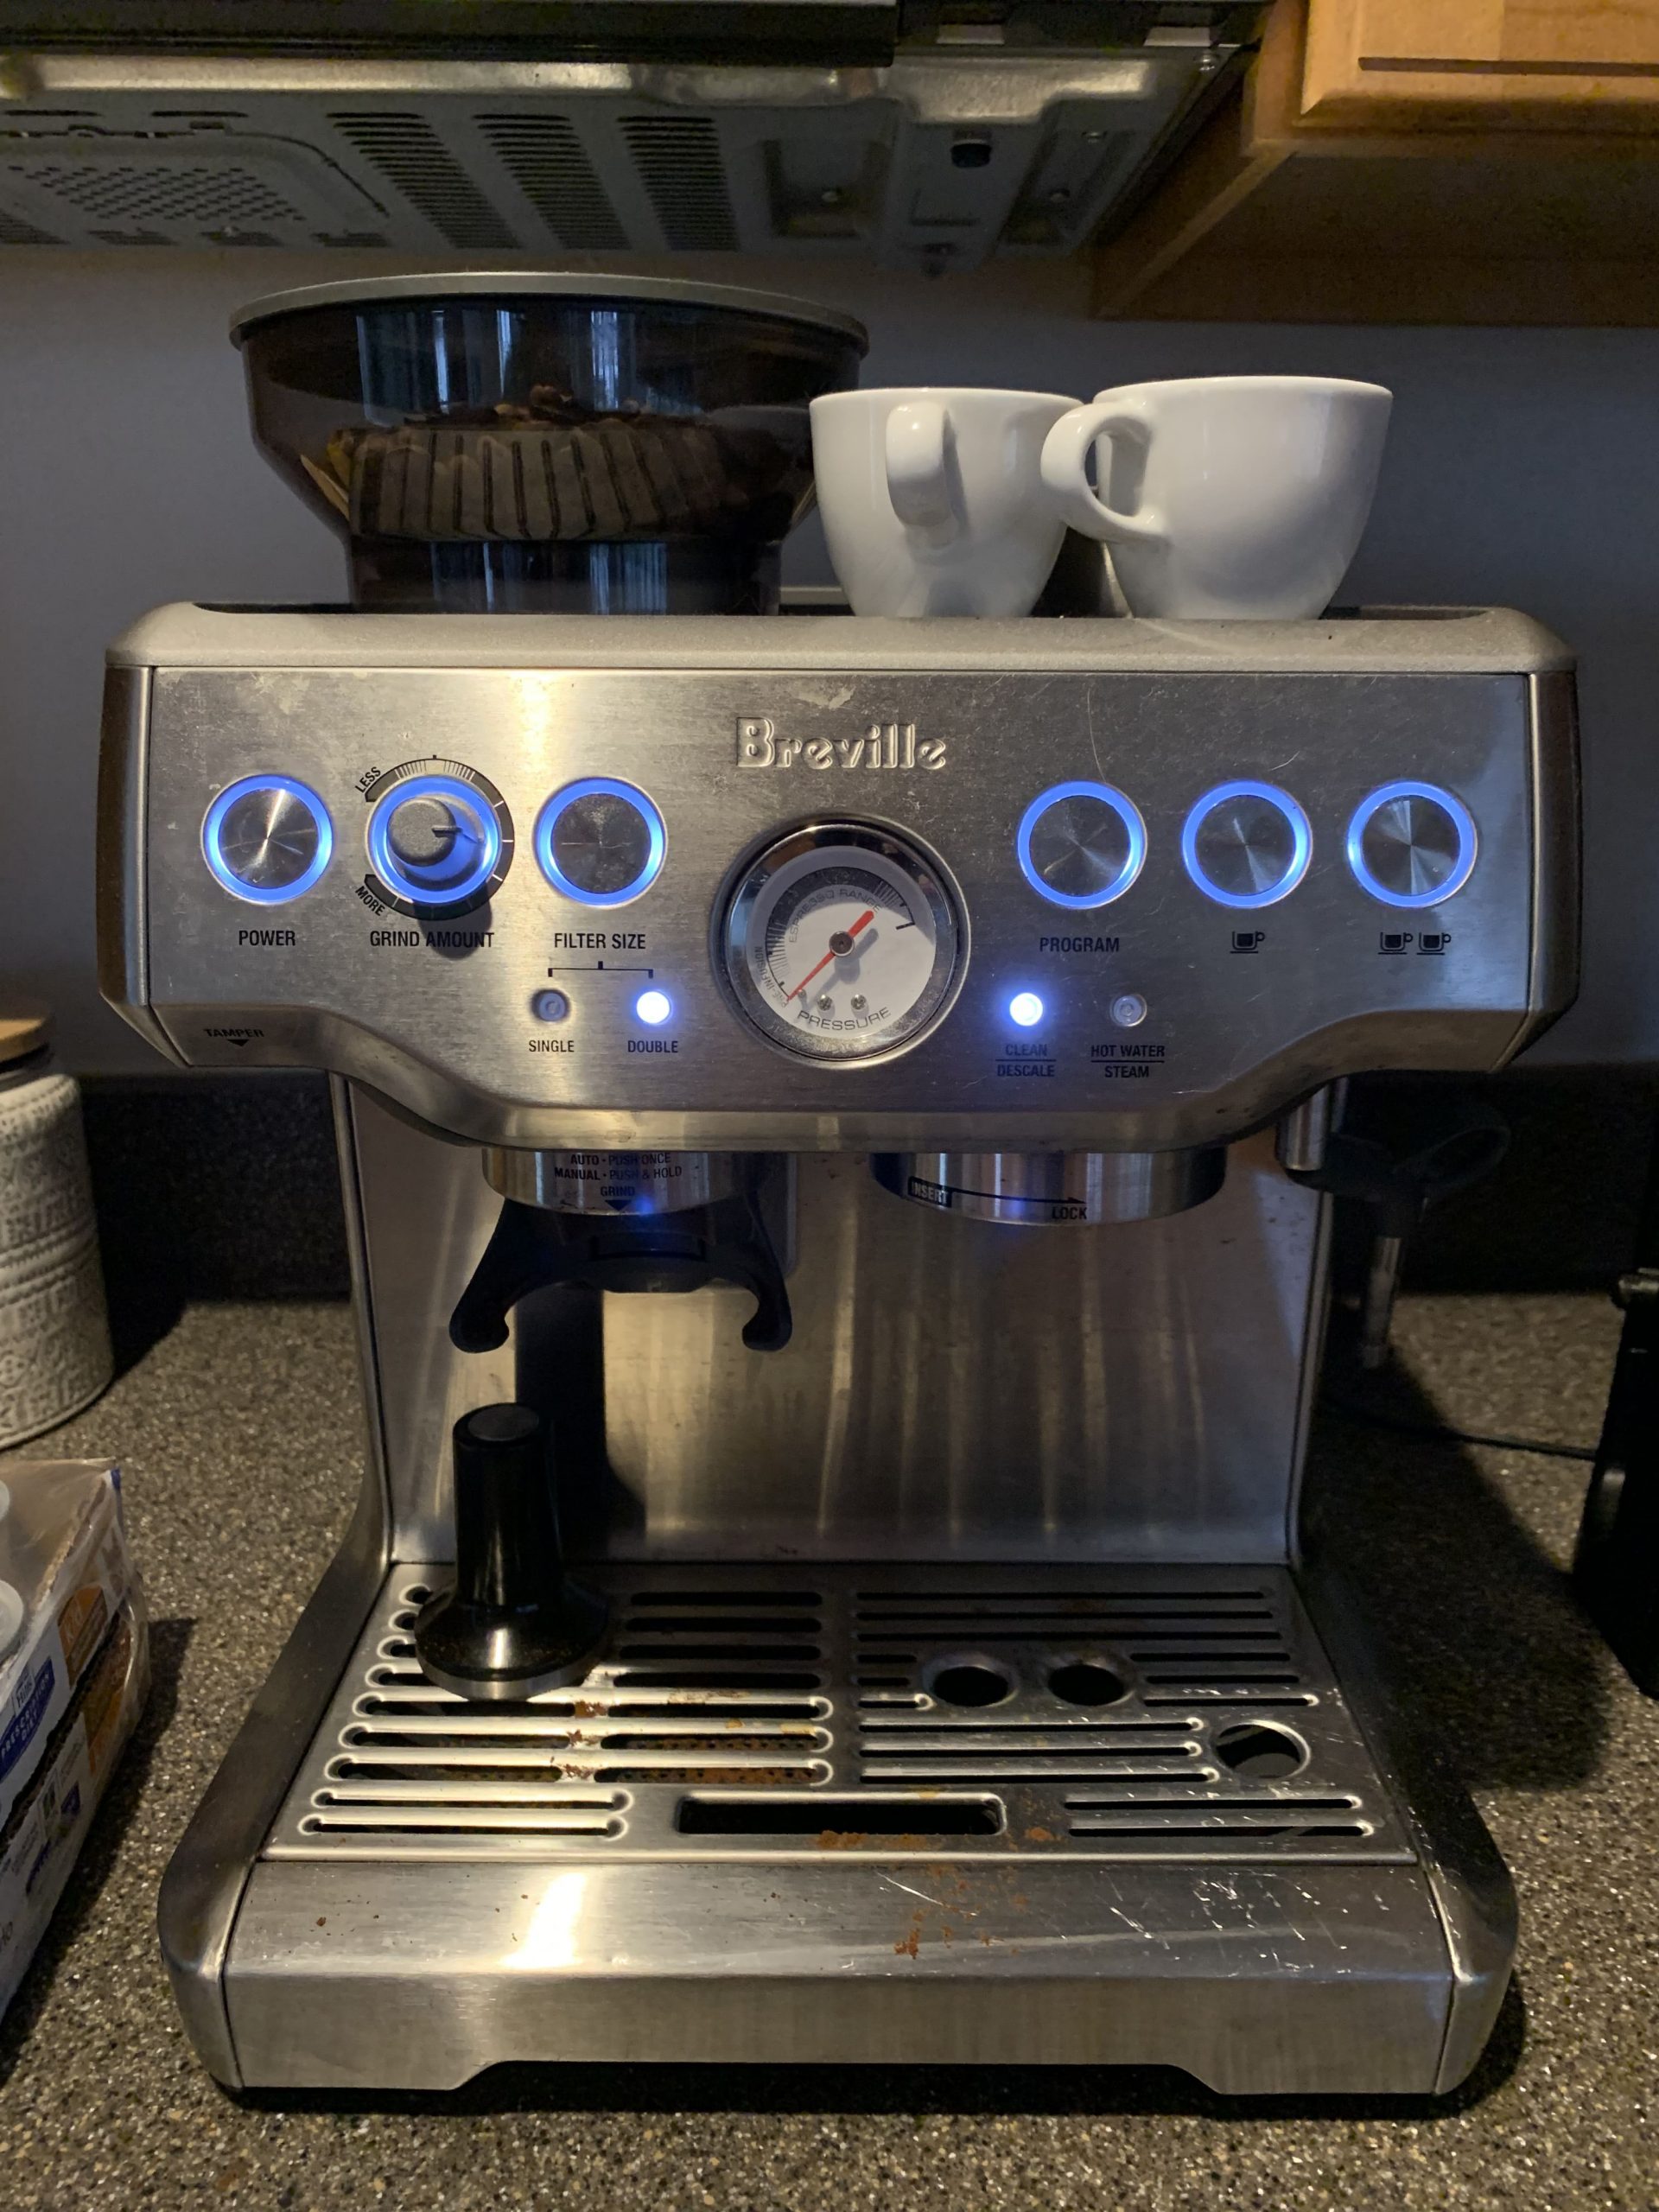 Breville Barista Express Clean Light Means It Is Time To Descale